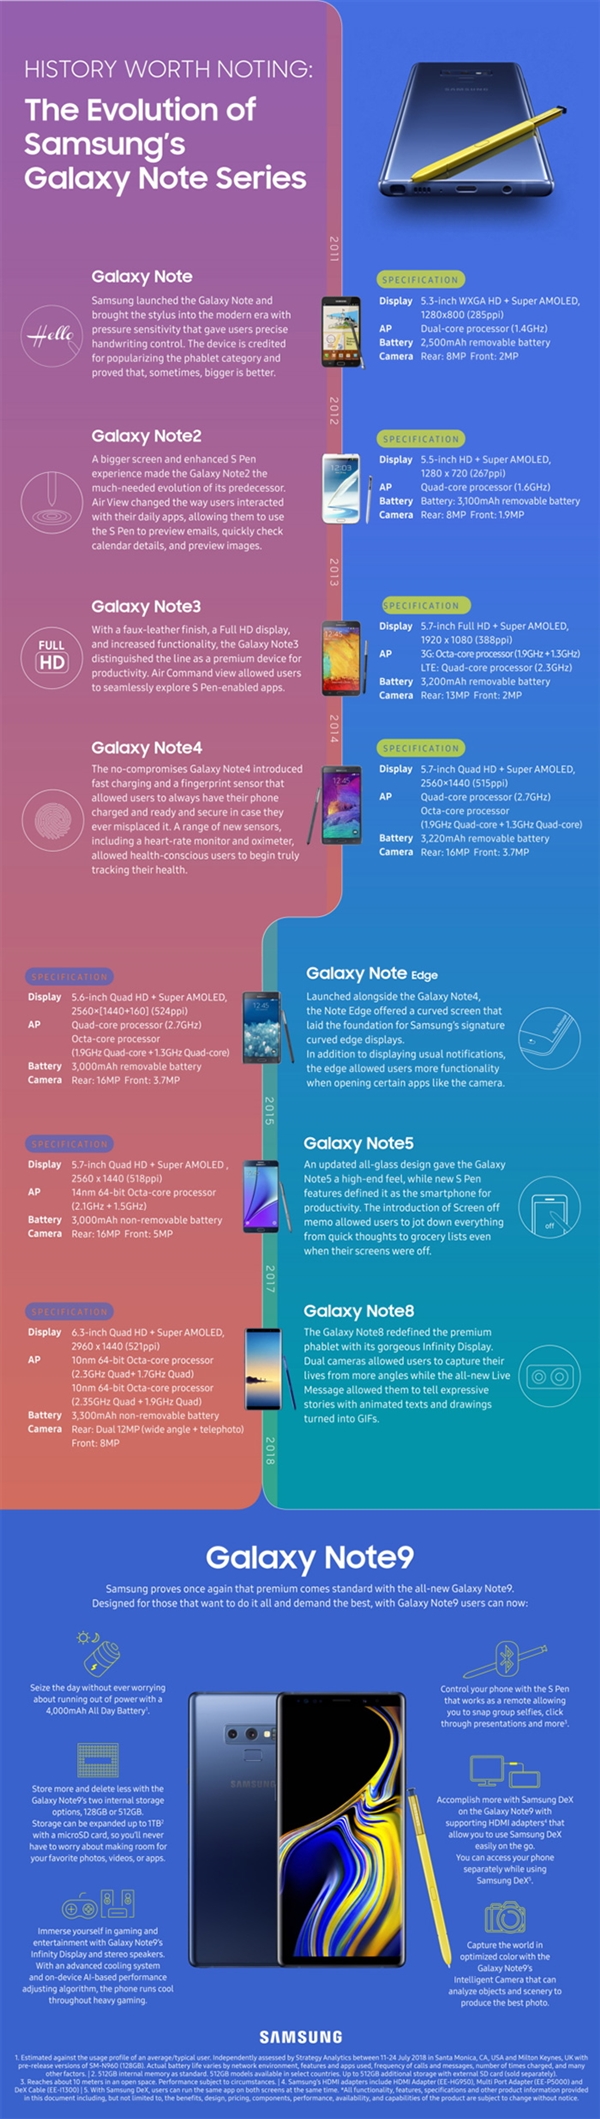 Evolution of Samsung Galaxy Note infographic